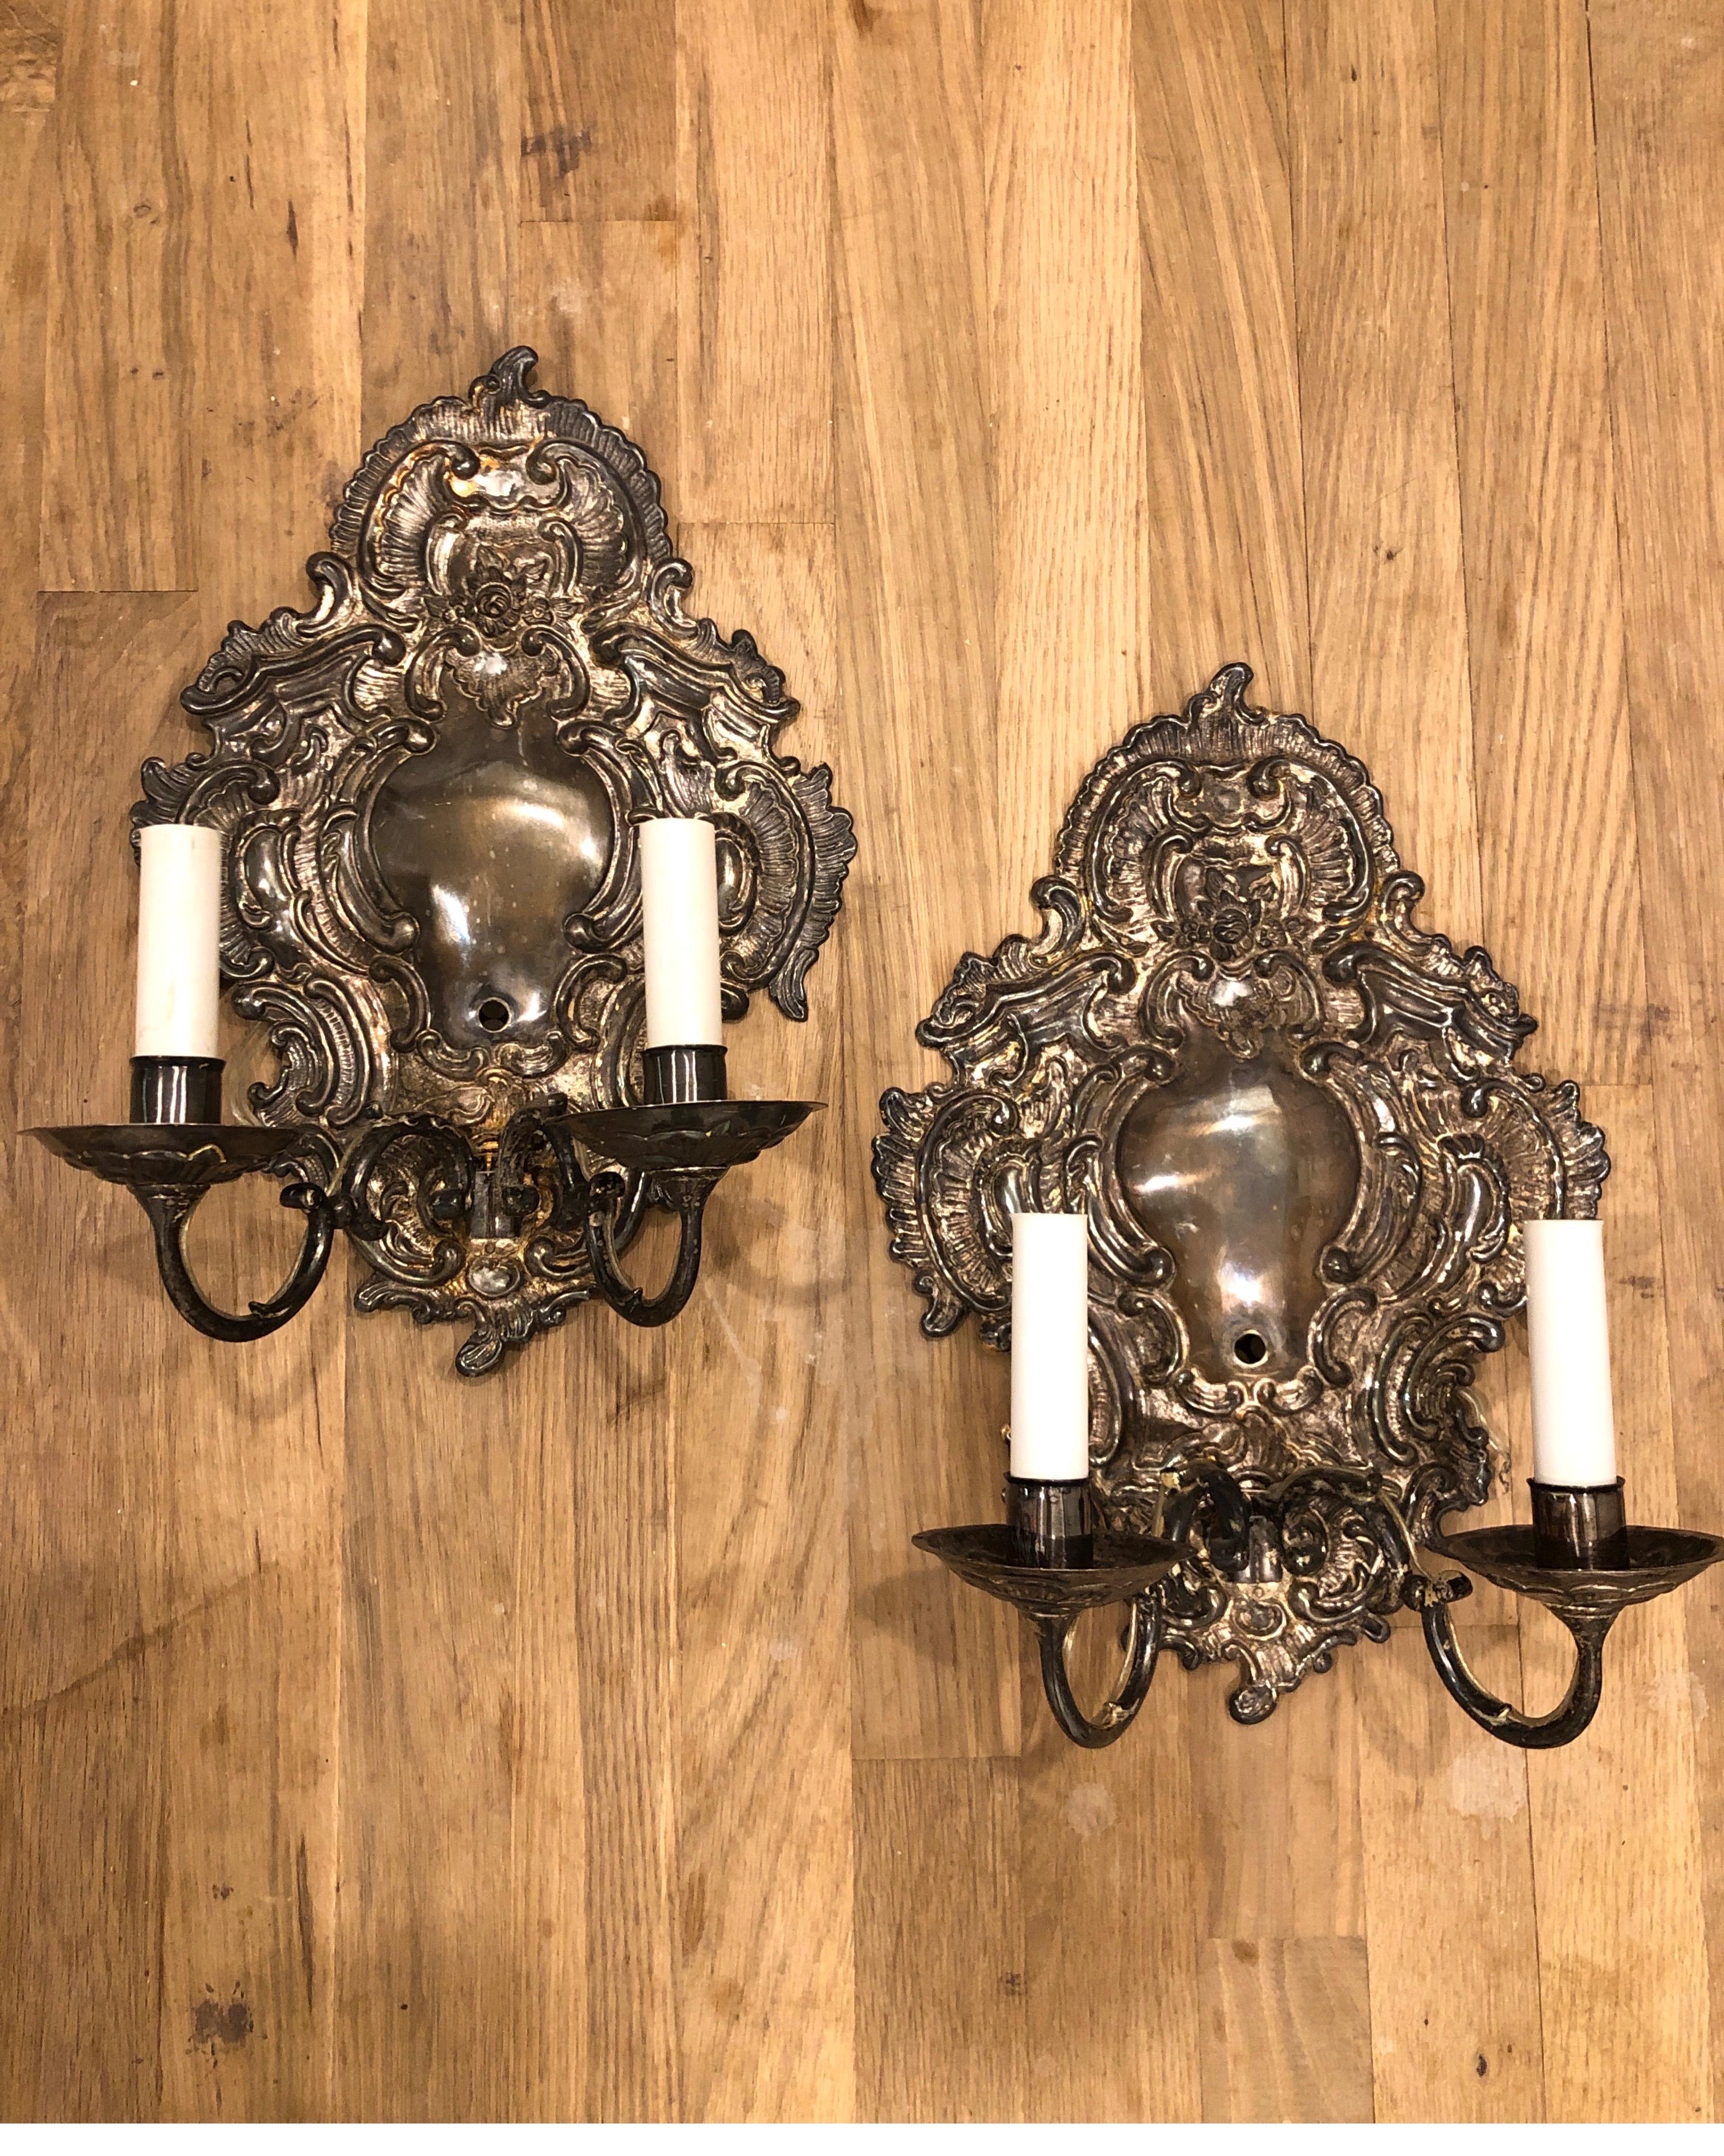 Pair of Paul Ferrante wall sconces. Silver plating with detailed relief backplates. Double S-curved arms.

Selling as a pair.